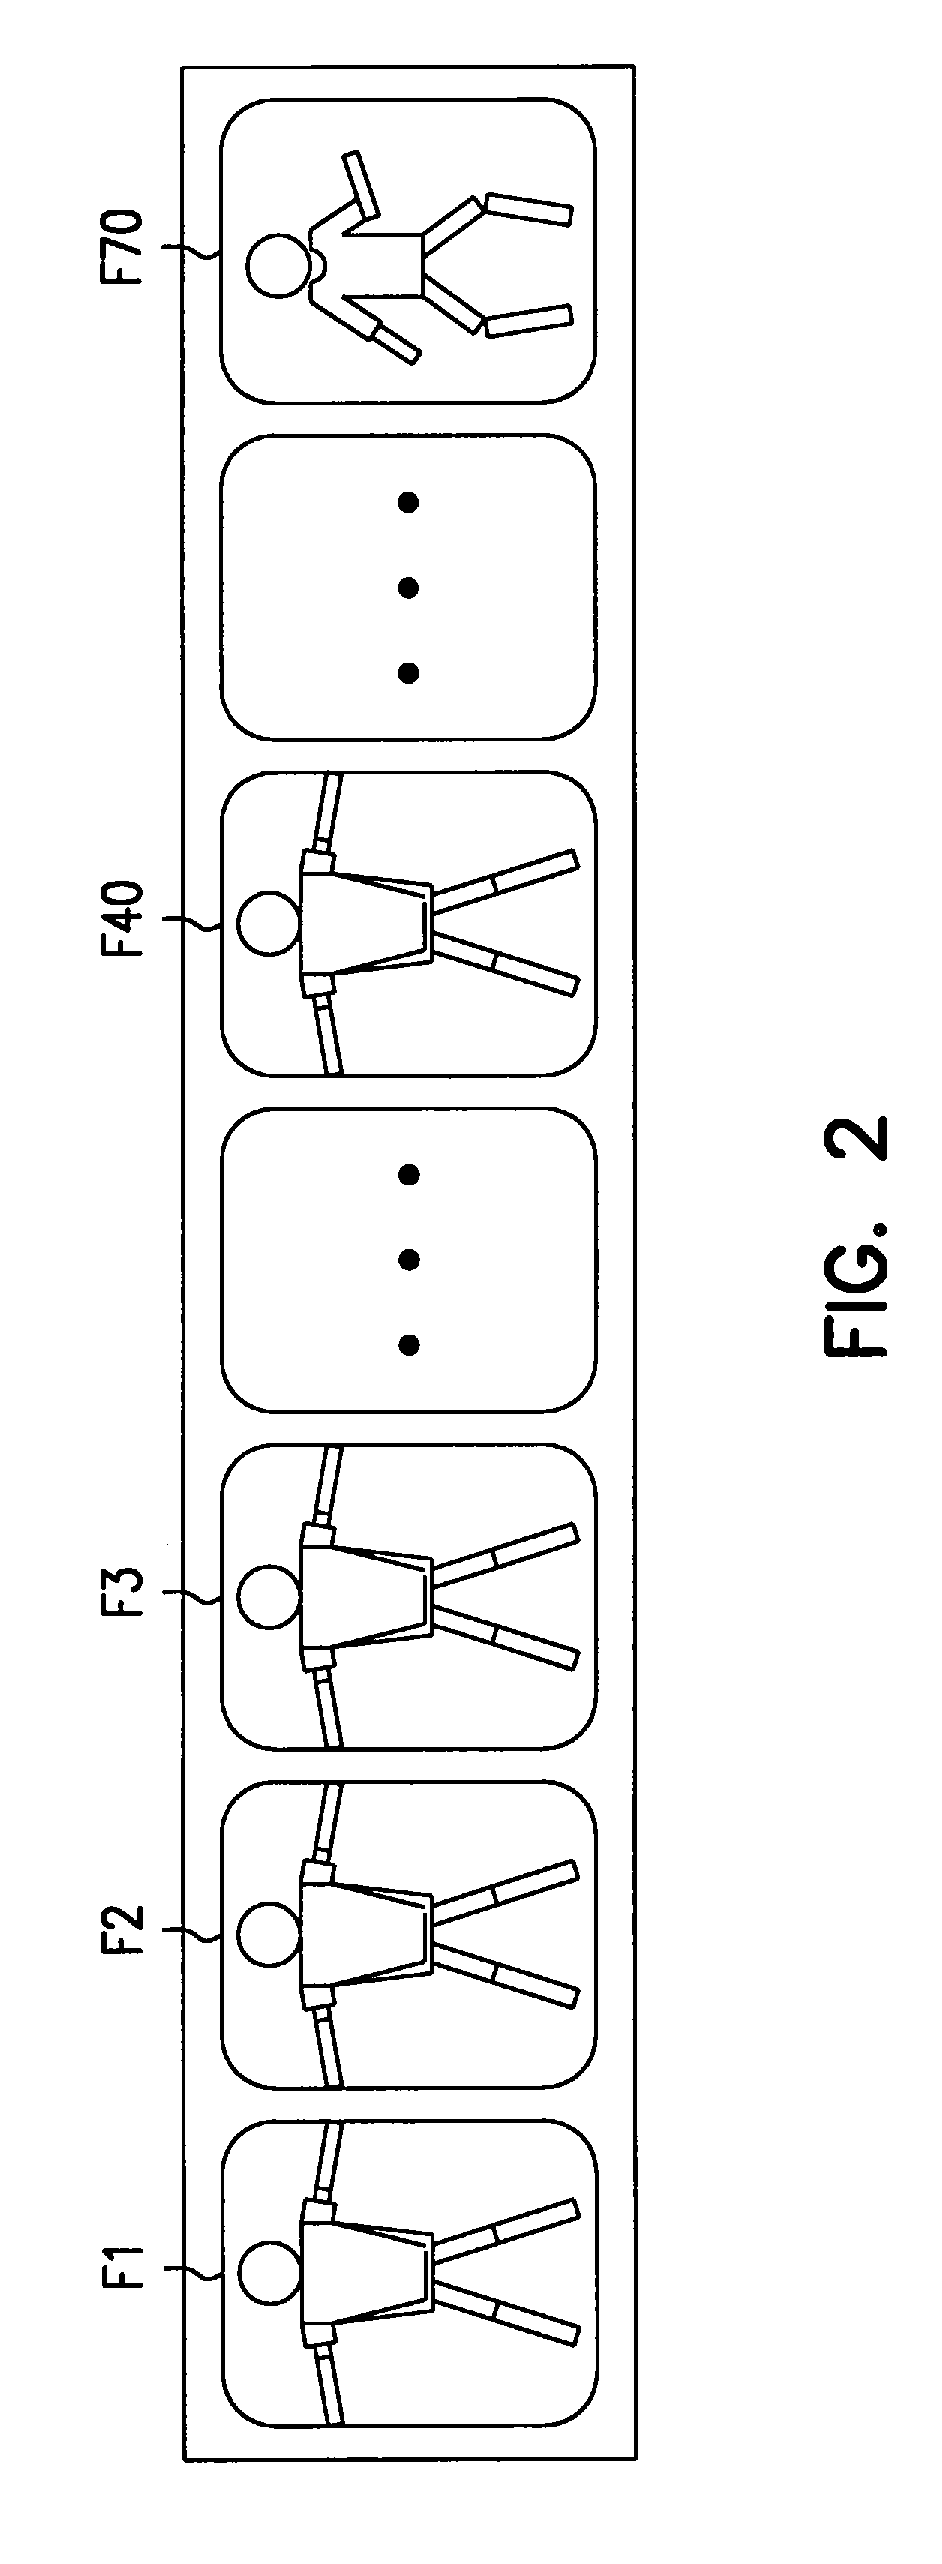 System and method for displaying selected garments on a computer-simulated mannequin